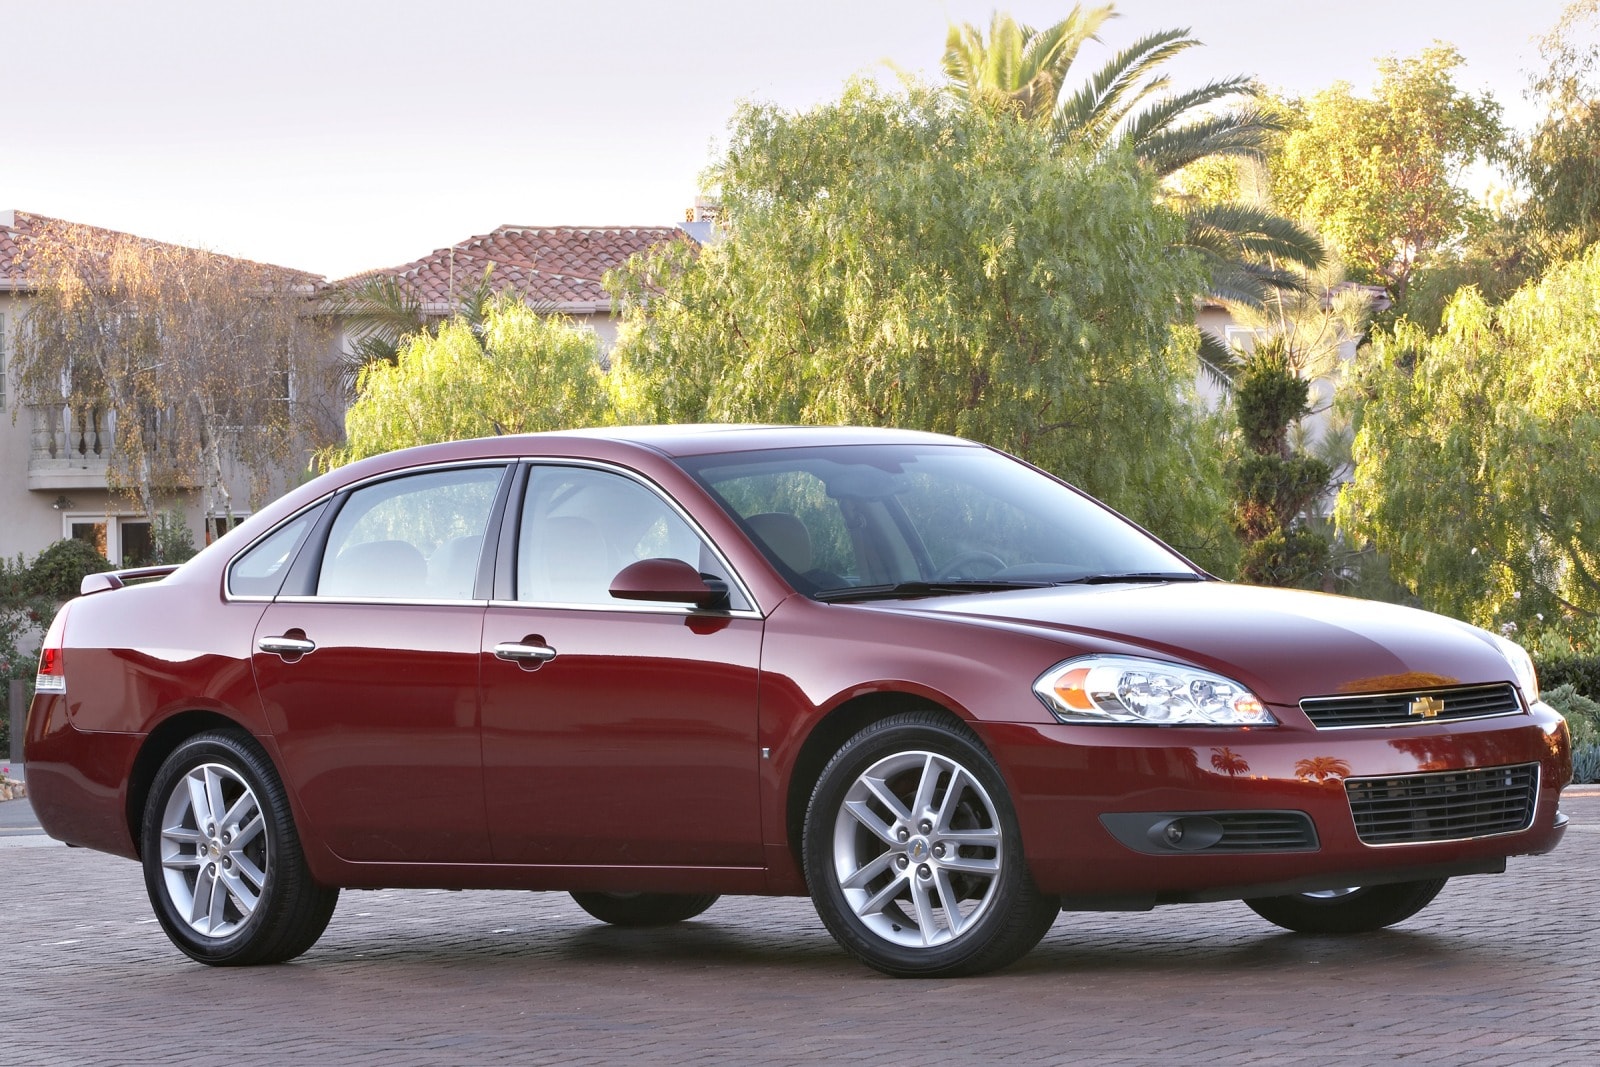 2010 Chevy Impala Review & Ratings | Edmunds